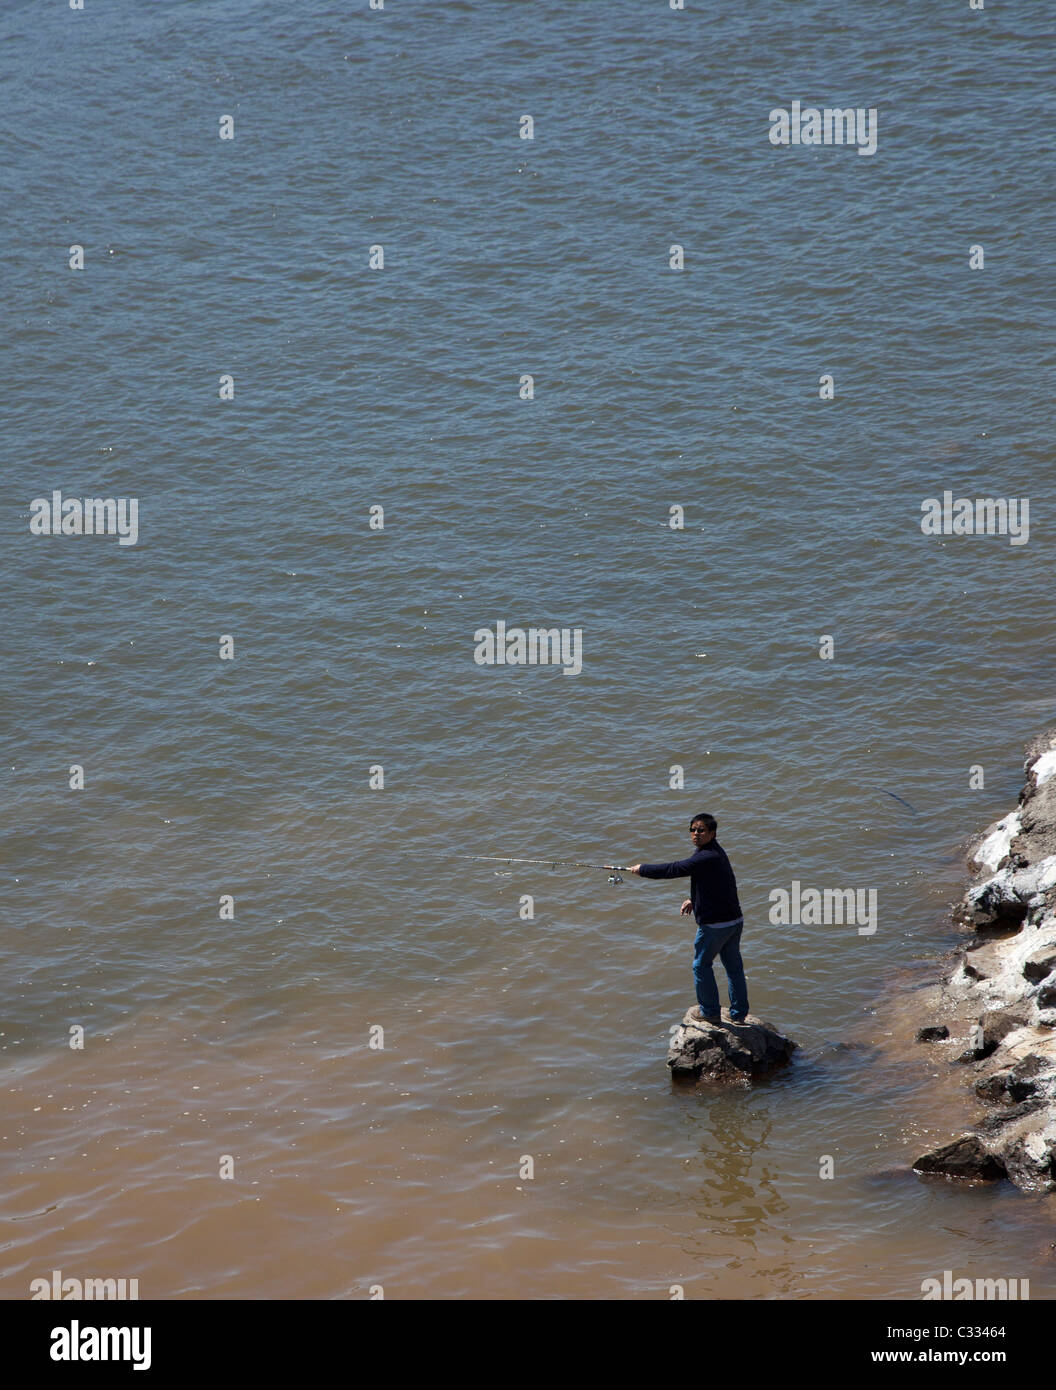 Lenoir City, Tennessee - A fisherman below the Tennessee Valley Authority's Fort Loudoun Dam on the Tennessee River. Stock Photo